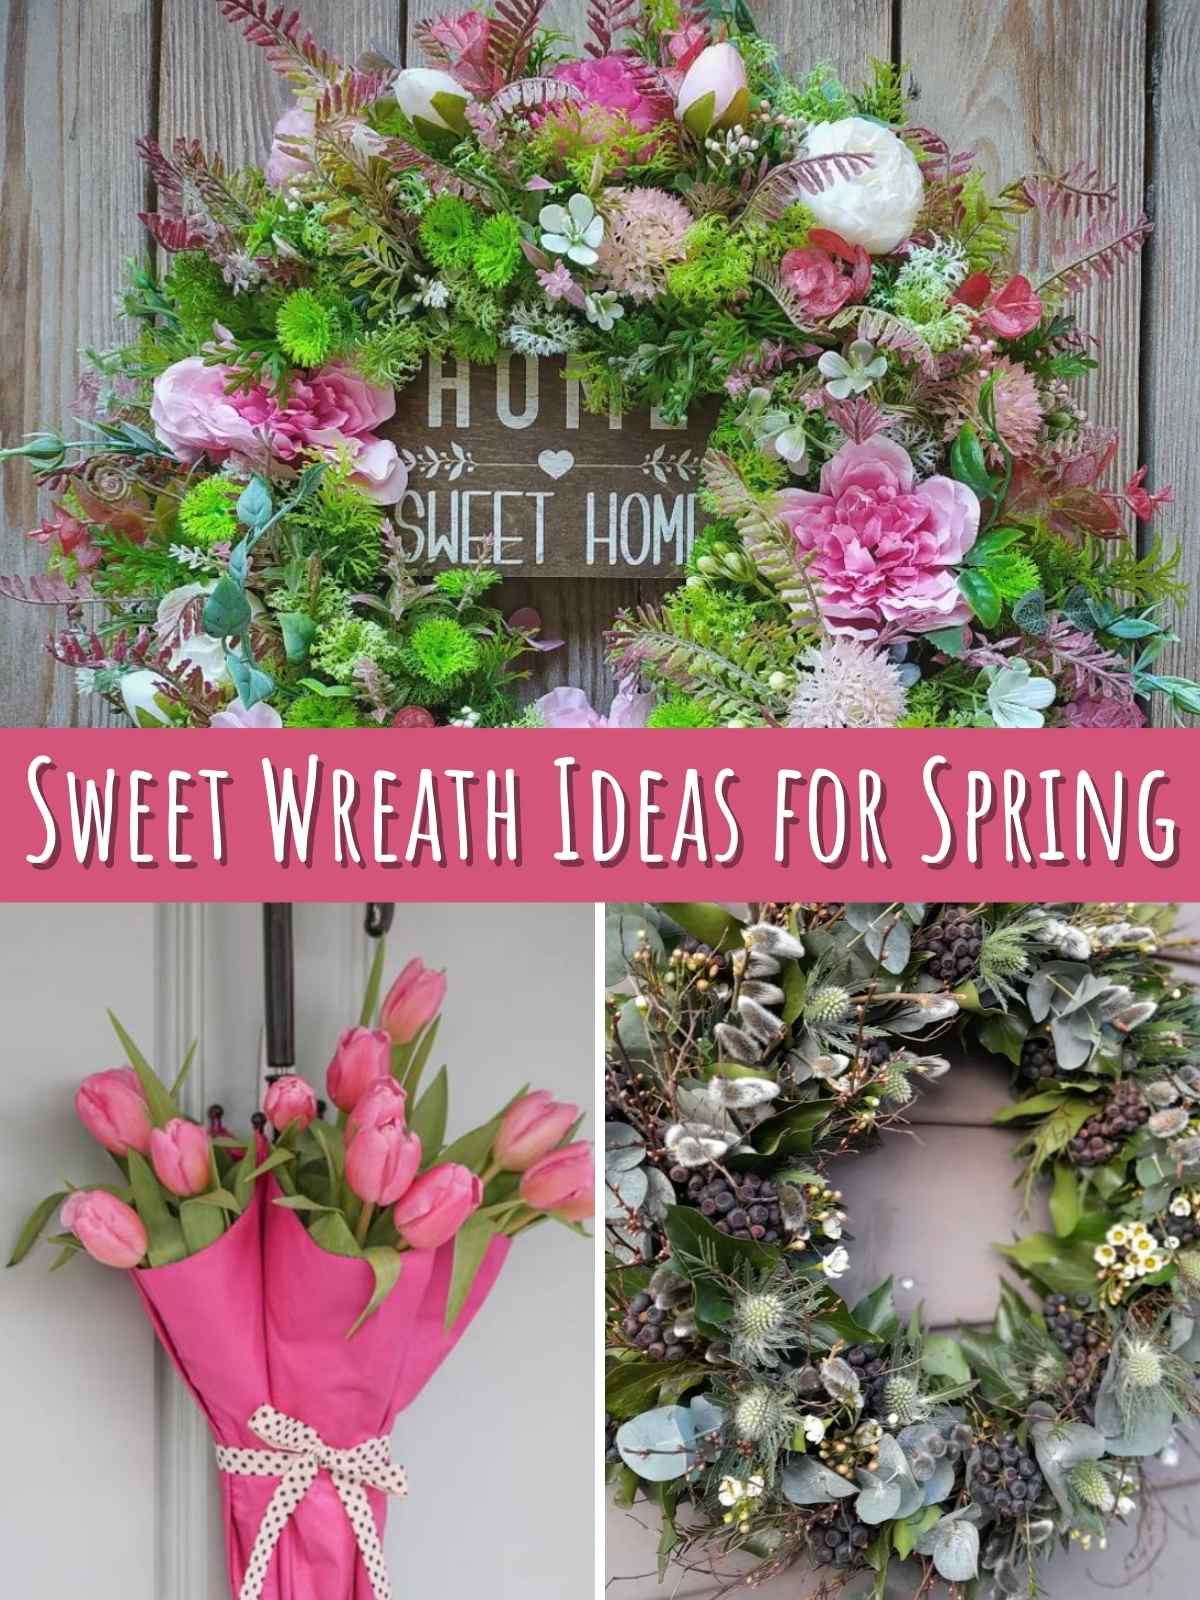 Sweet wreath ideas for spring. 3 cute wreaths with pink.